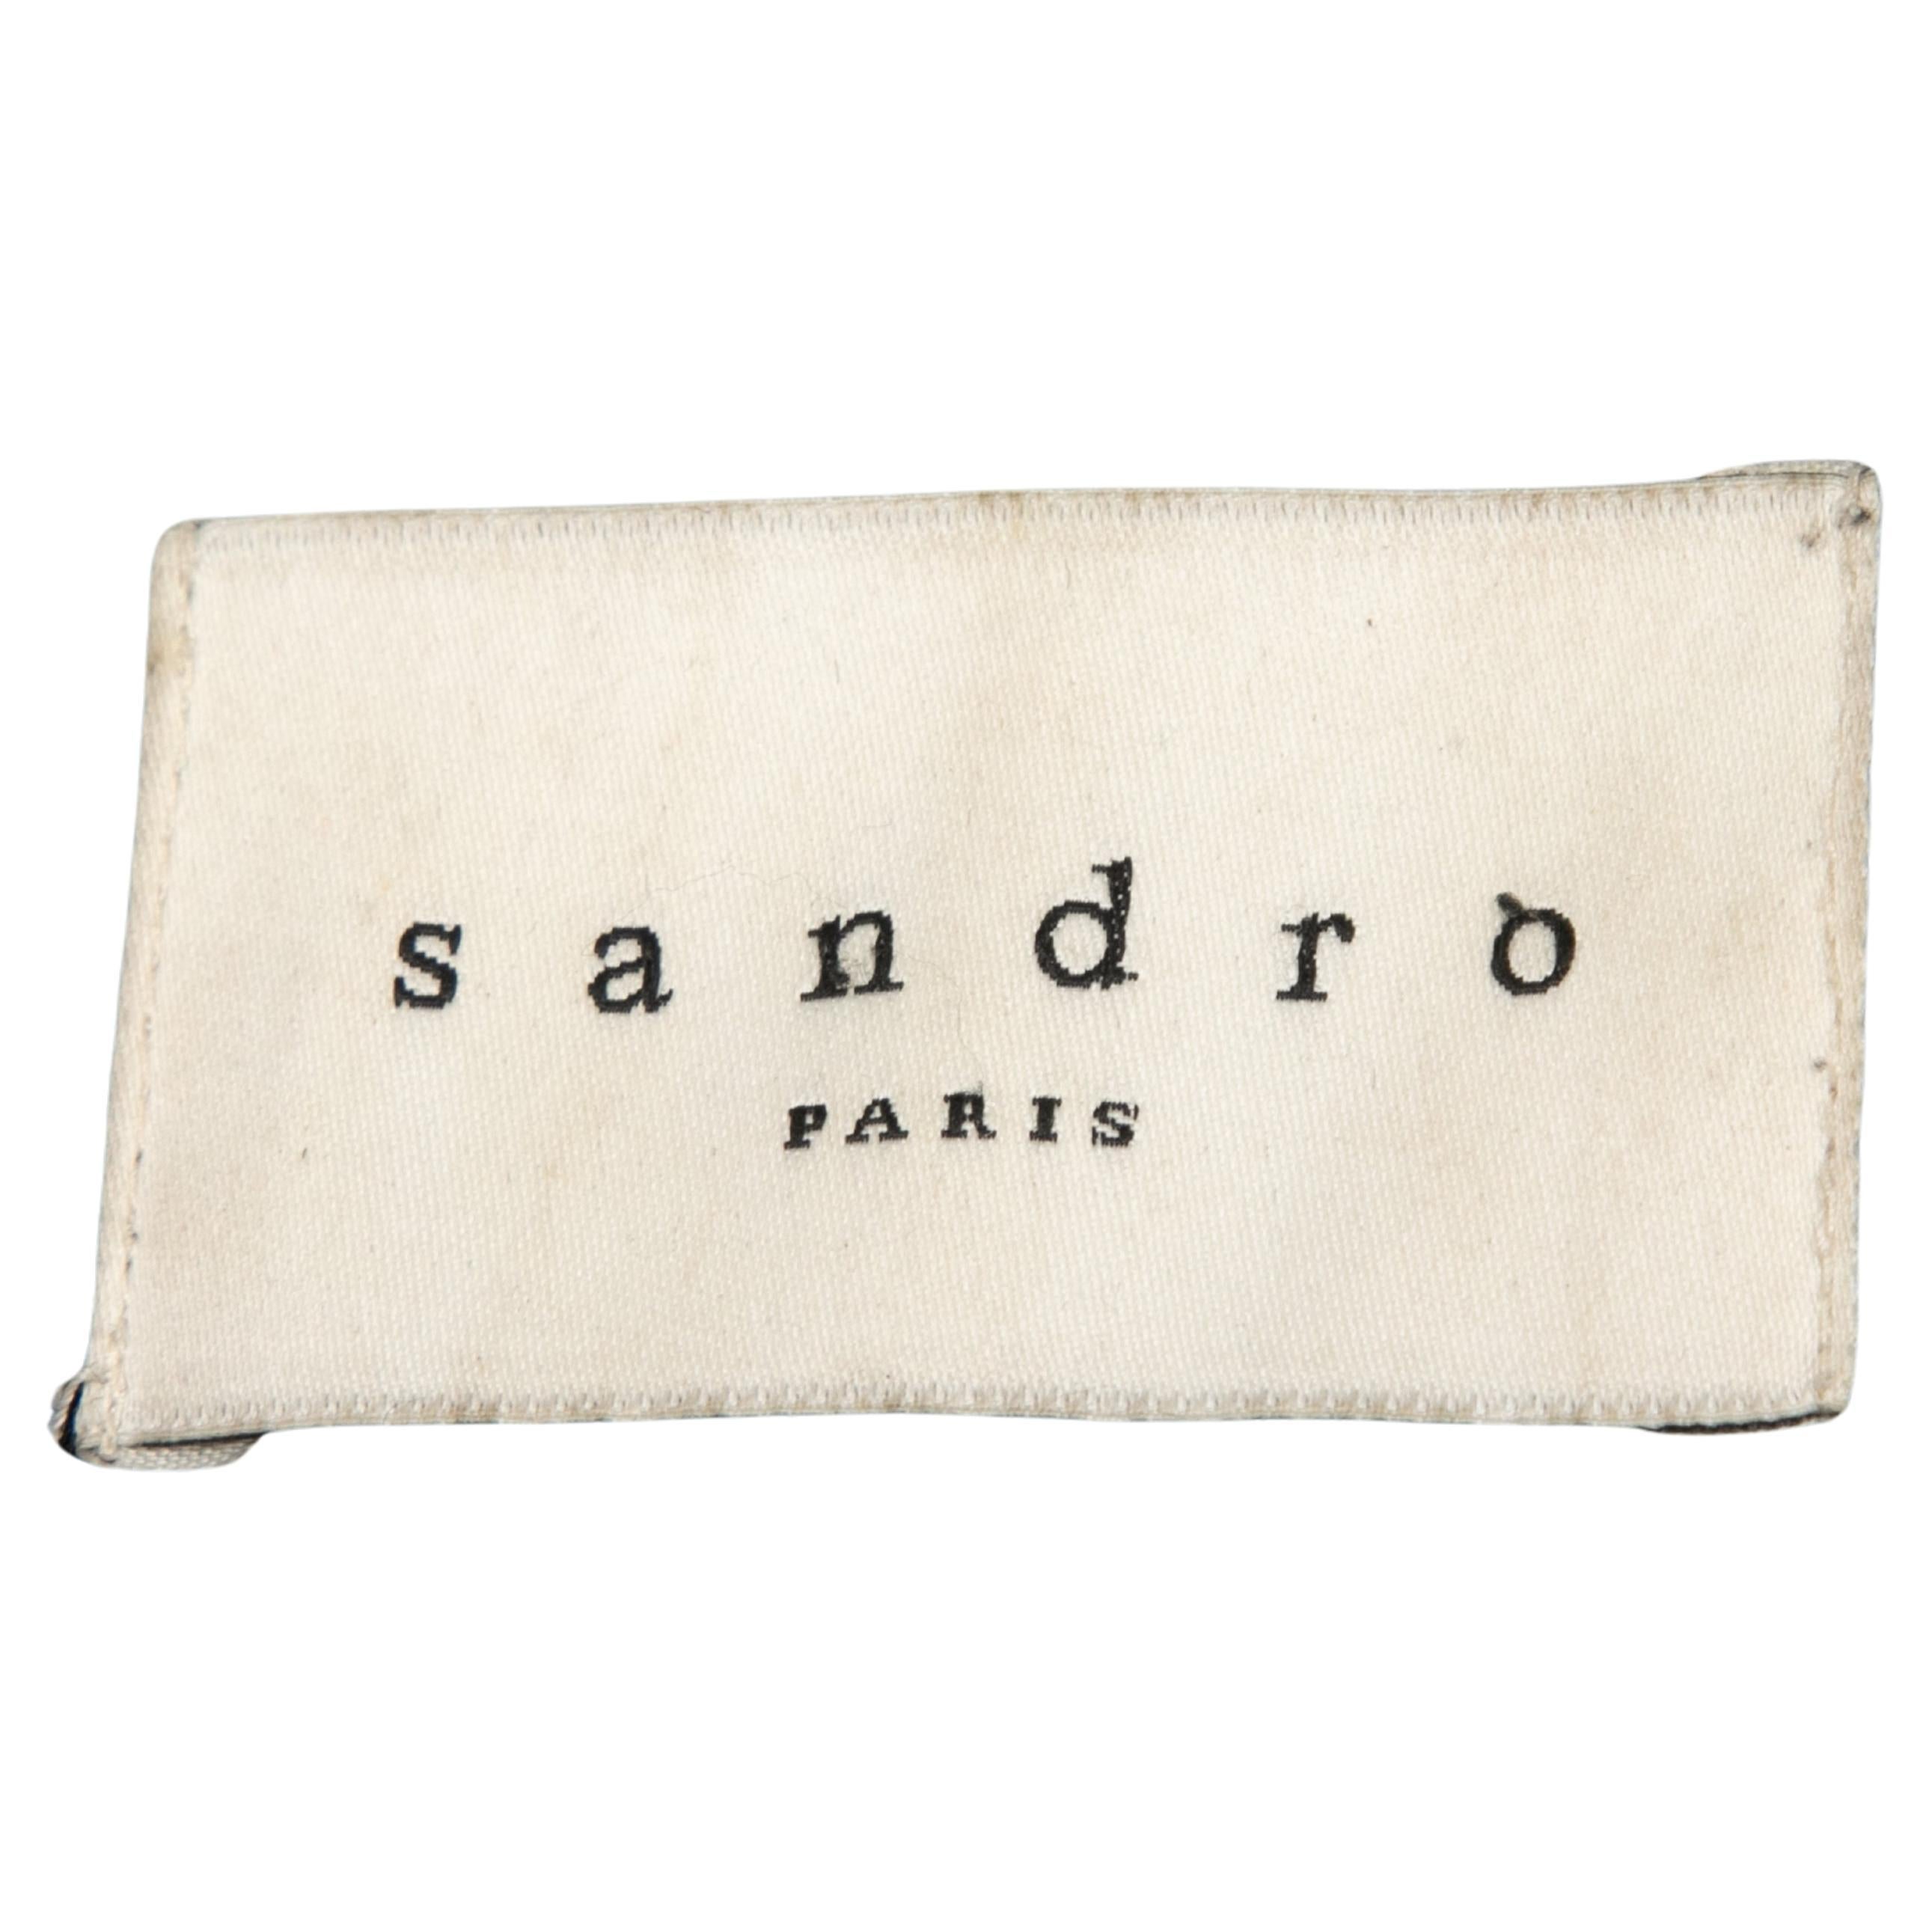 Black layered leather jacket by Sandro. Crew neck. Welt pockets at hips. Front zip closure. 33